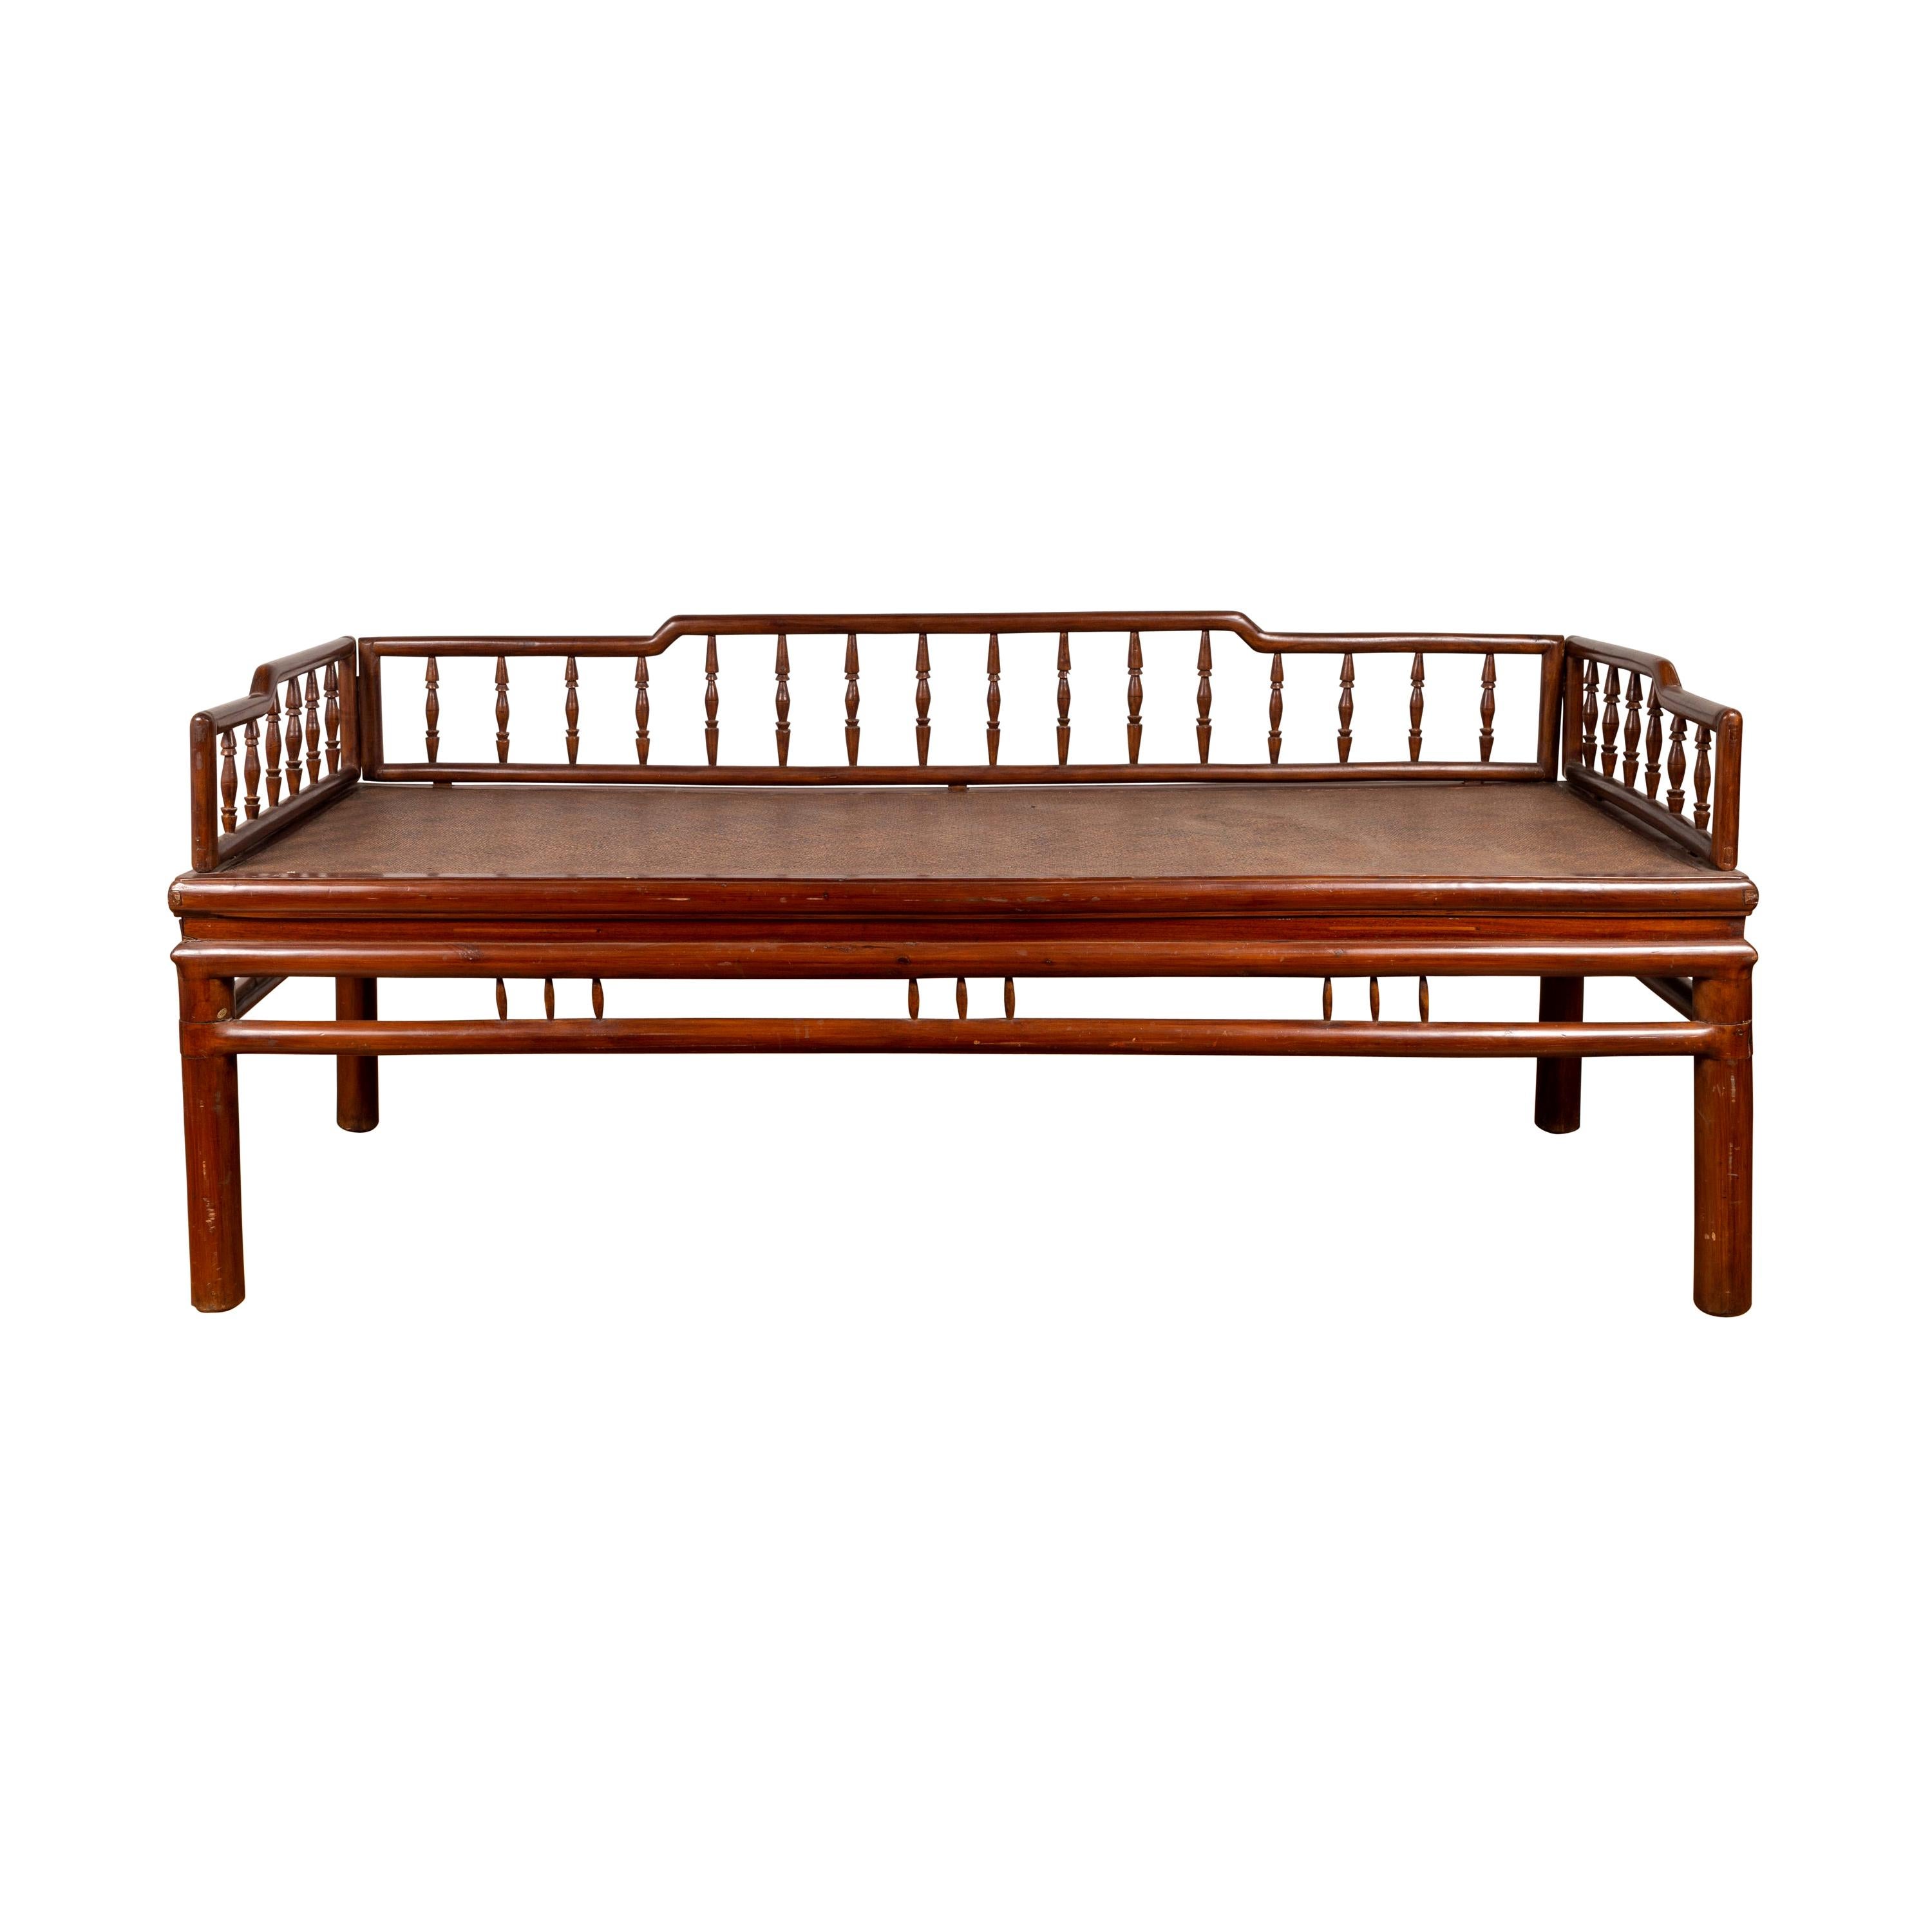 Chinese Antique Wooden Daybed with Woven Rattan Seat and Spindle Accents